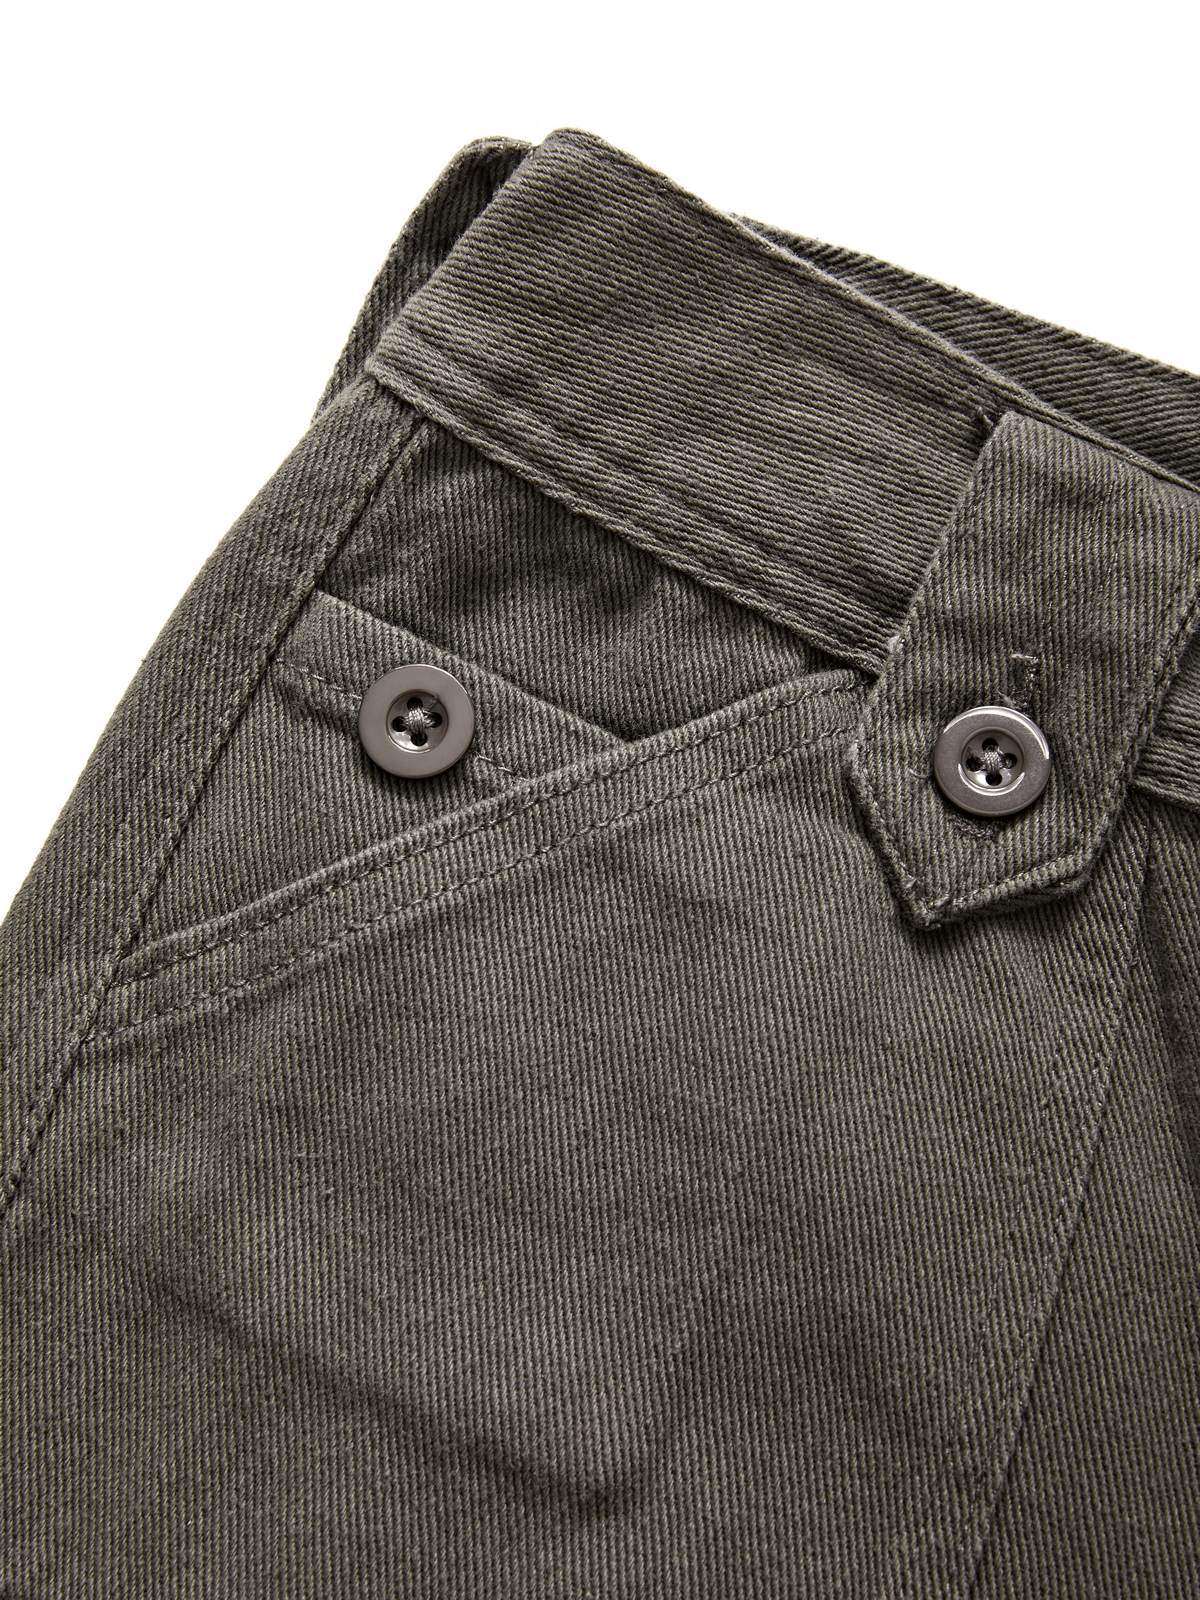 Buttoned Straight Leg Cargo Jeans